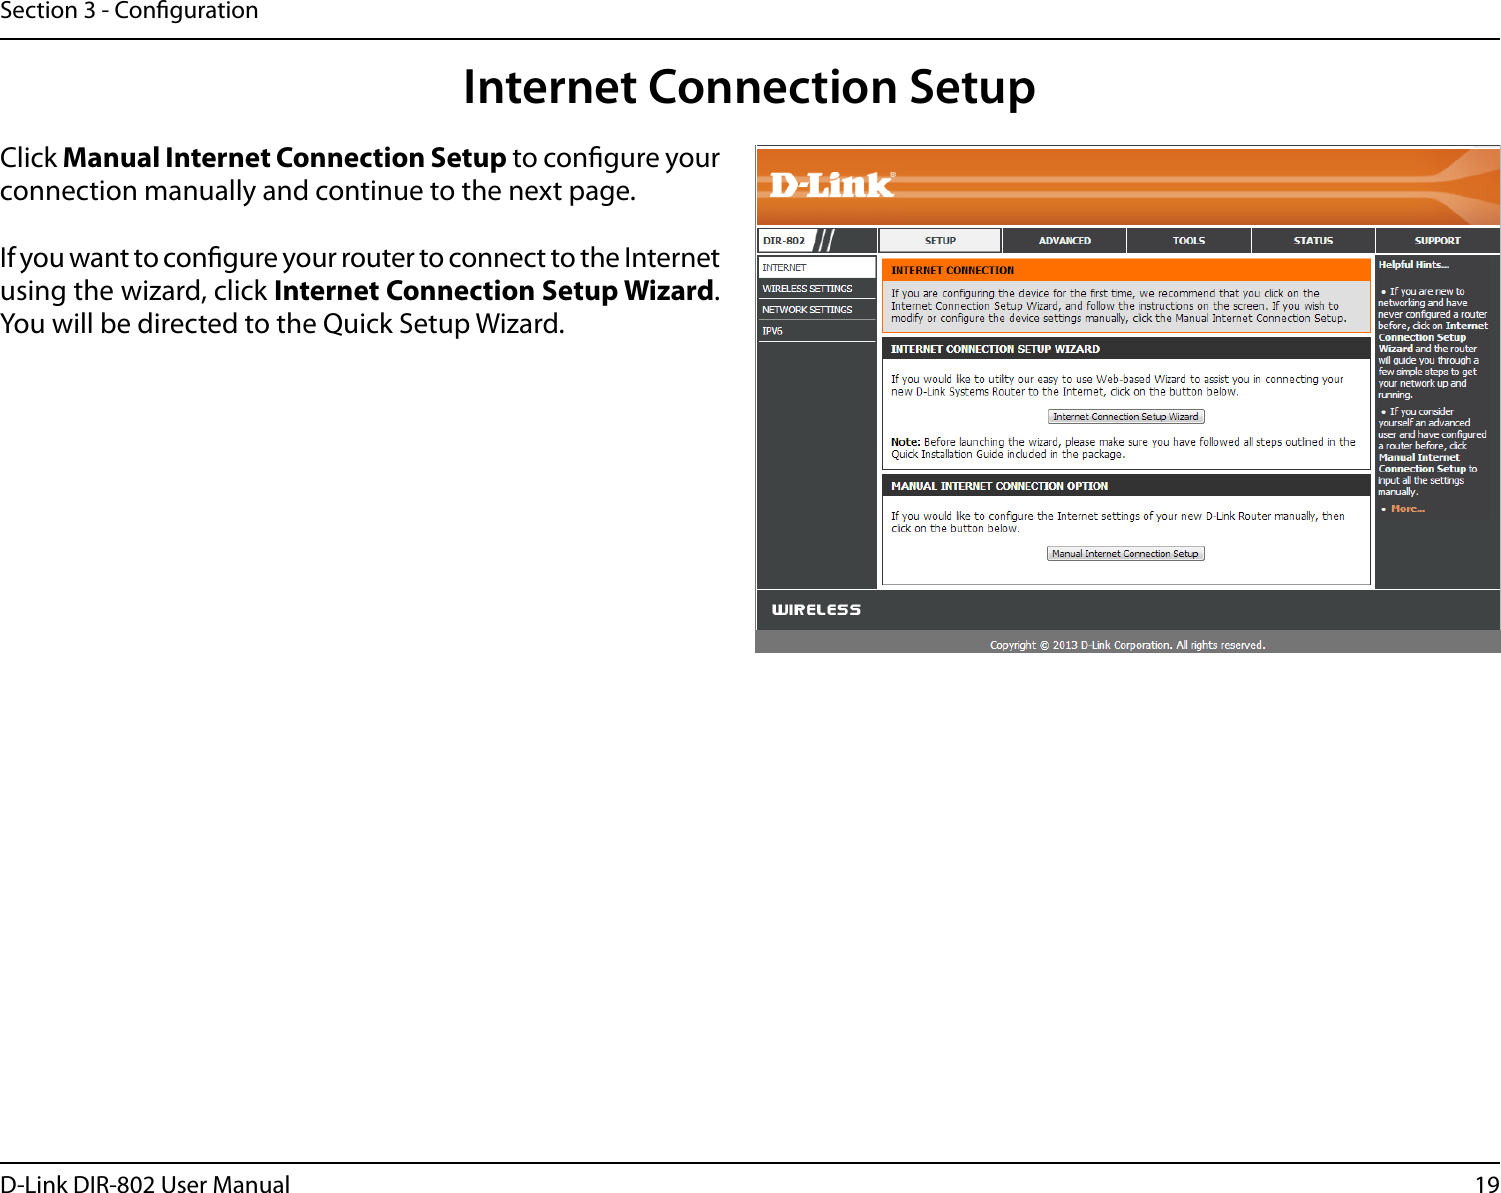 19D-Link DIR-802 User ManualSection 3 - CongurationInternet Connection SetupClick Manual Internet Connection Setup to congure your connection manually and continue to the next page.If you want to congure your router to connect to the Internet using the wizard, click Internet Connection Setup Wizard. You will be directed to the Quick Setup Wizard. 